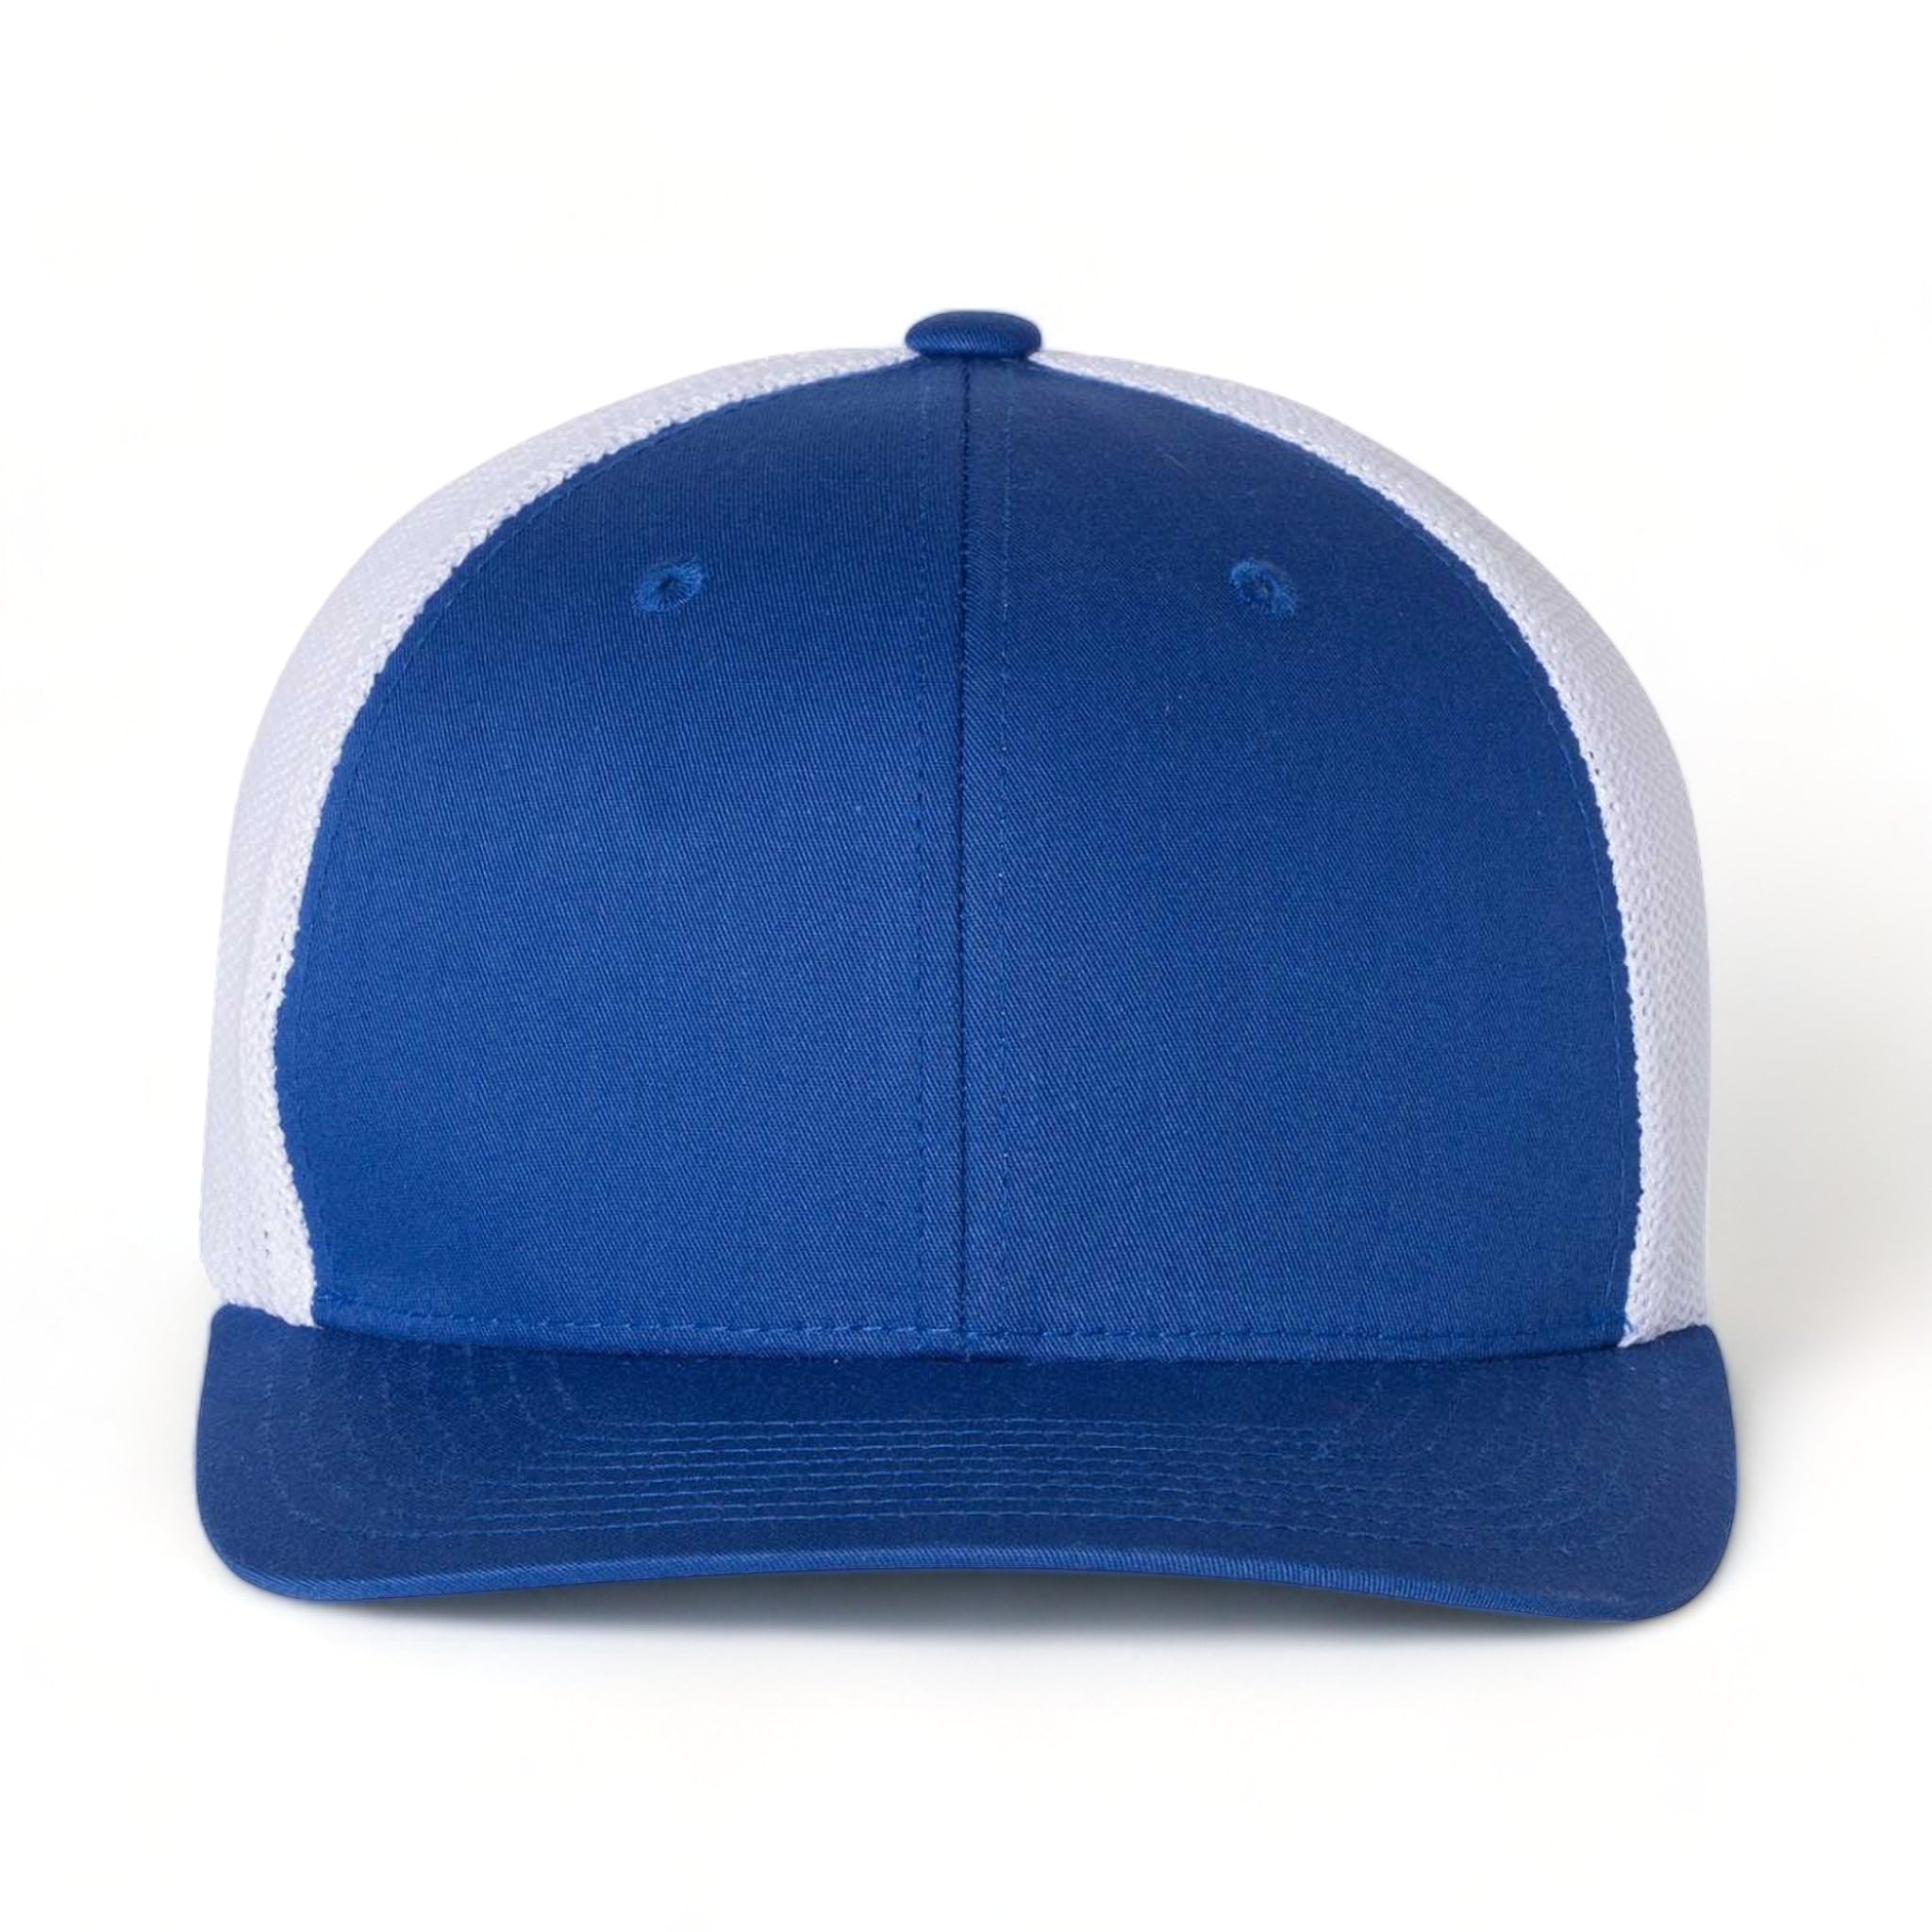 Front view of Flexfit 6511 custom hat in royal and white